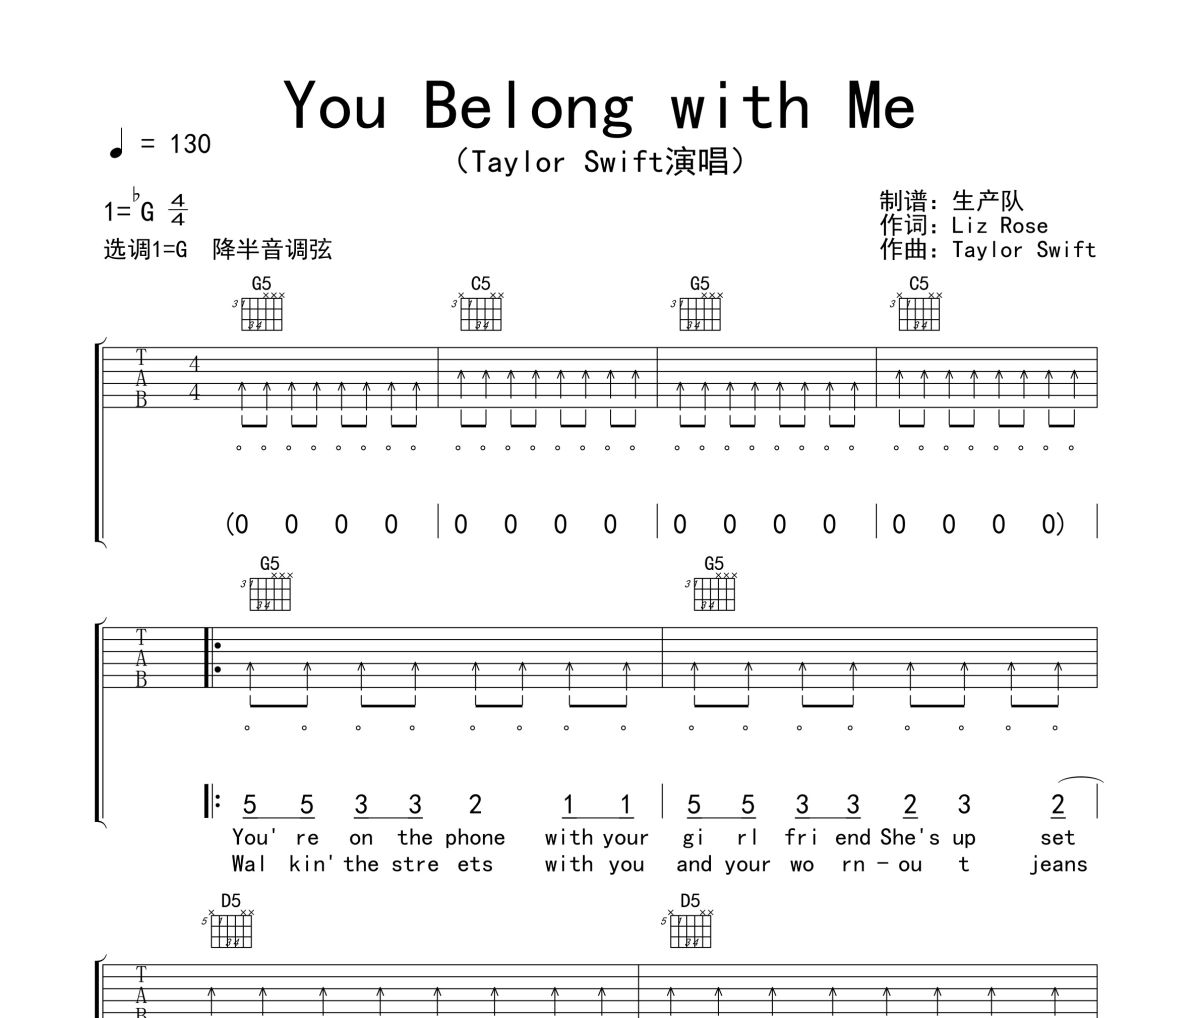 You Belong With Me吉他谱 Taylor Swift《You Belong With Me》六线谱G调吉